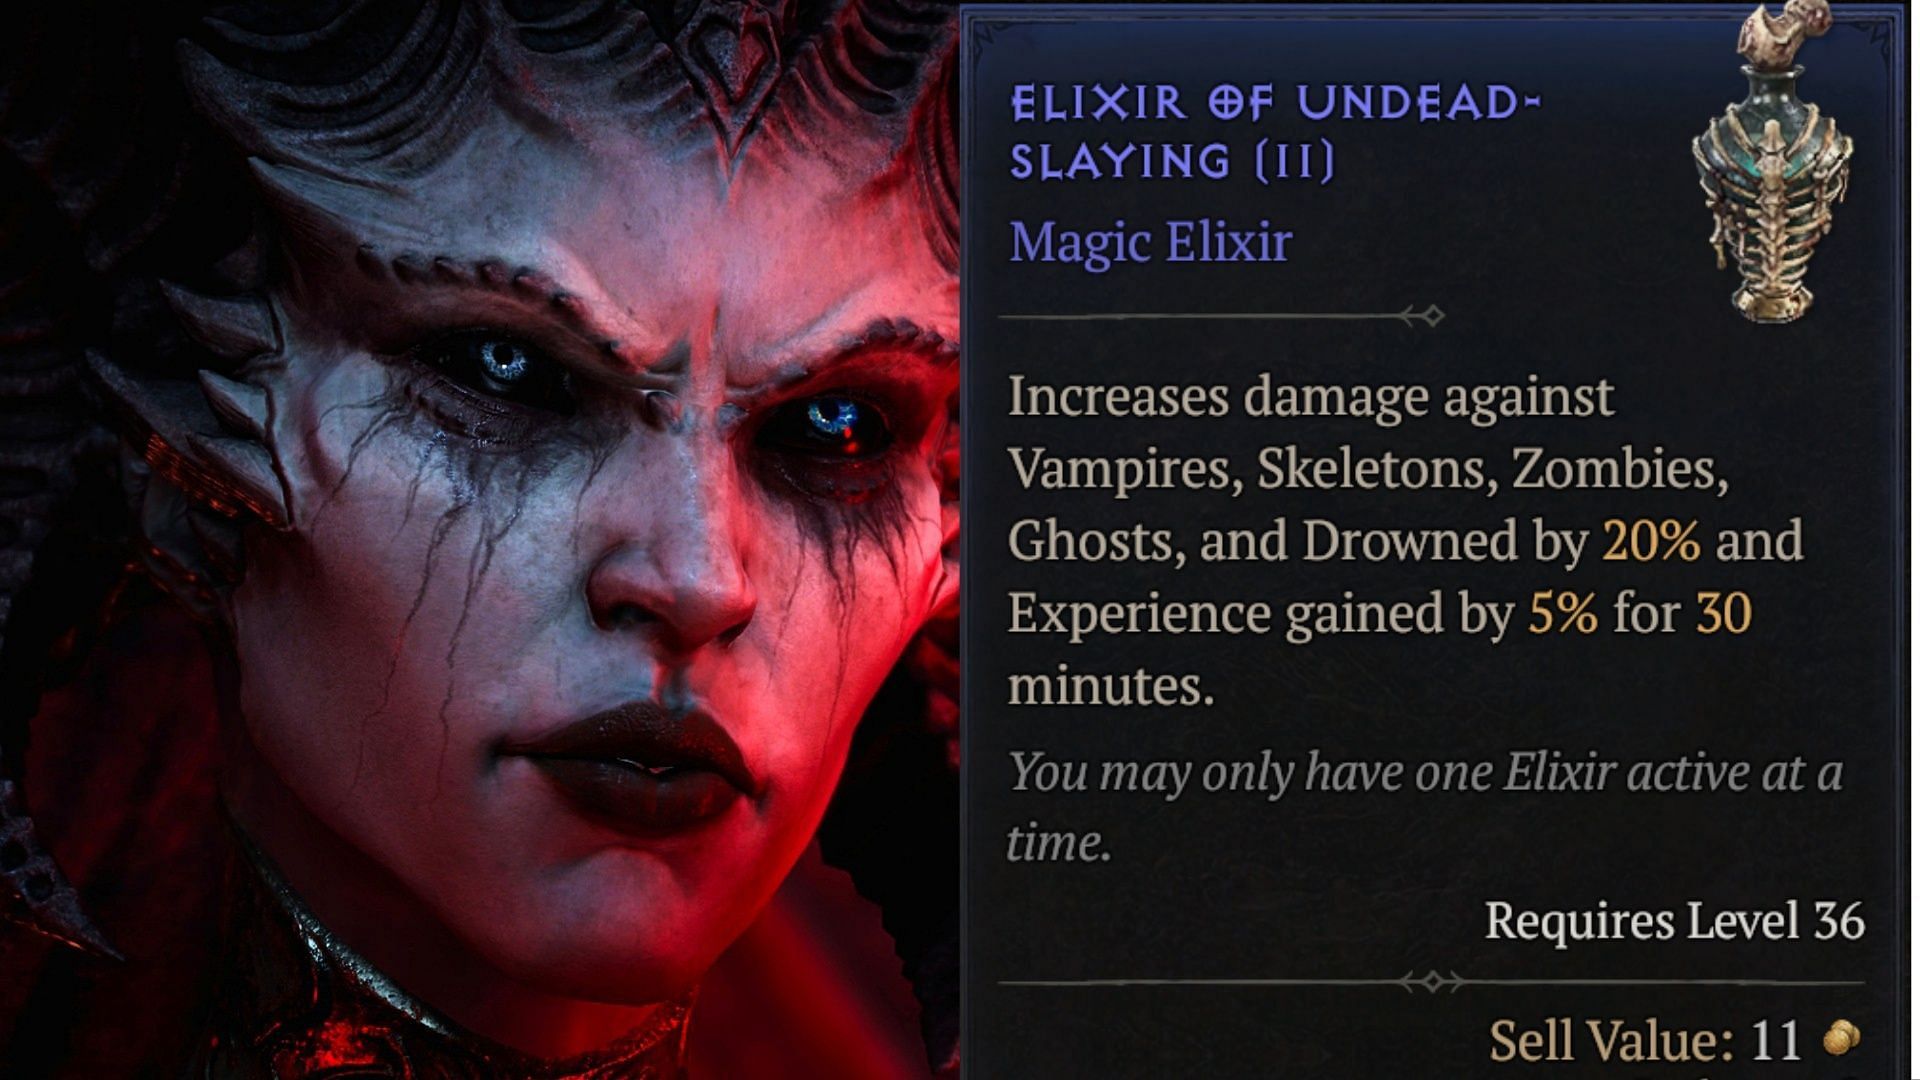 This elixir is highly useful against undead enemies (Images via Blizzard)